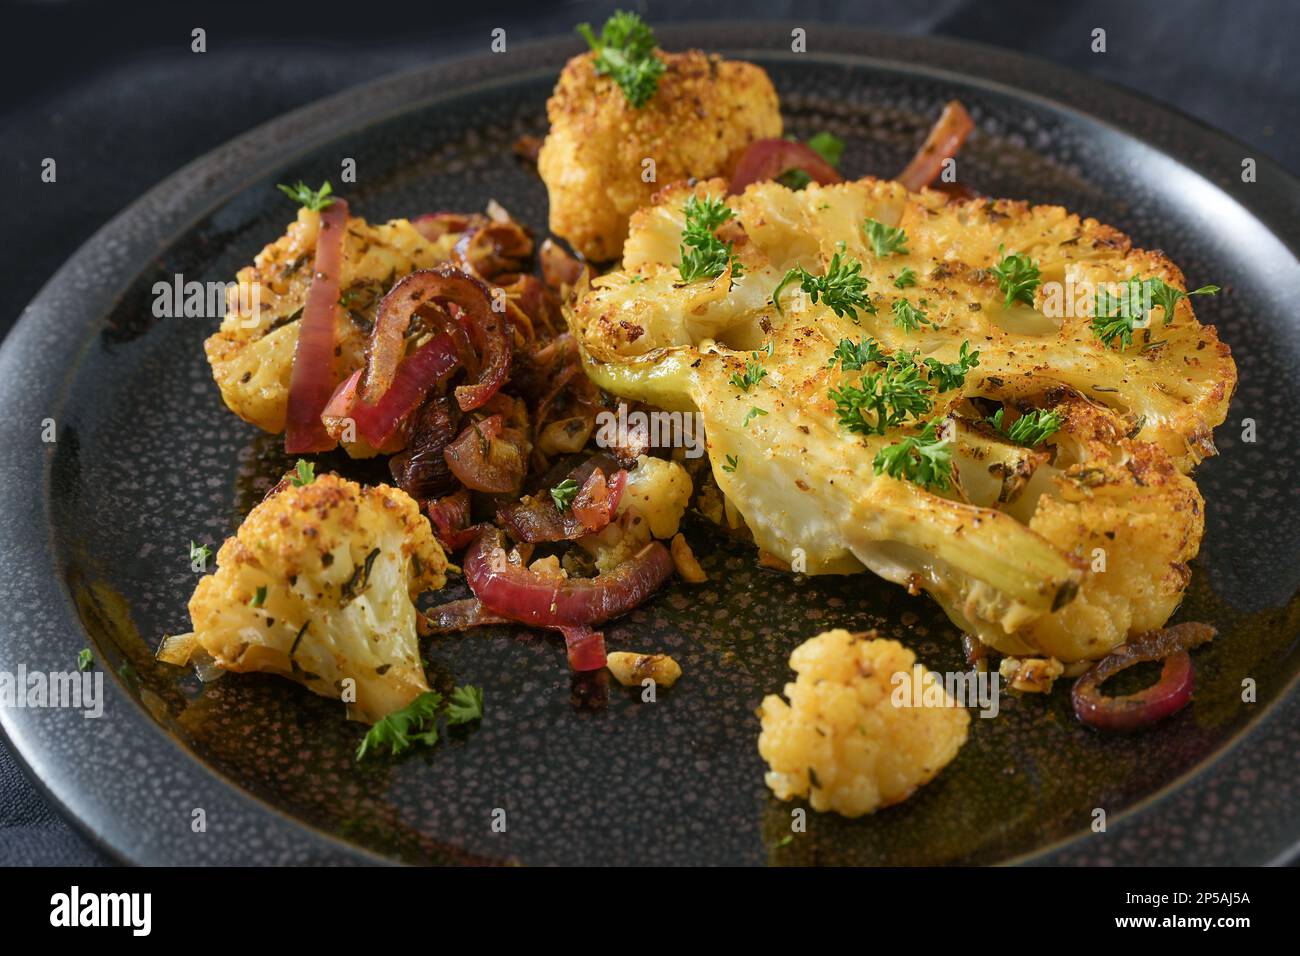 Baked spicy cauliflower slices with red onions on a black plate, healthy vegetable dish for low carb diet, close up shot, copy space, selected focus, Stock Photo